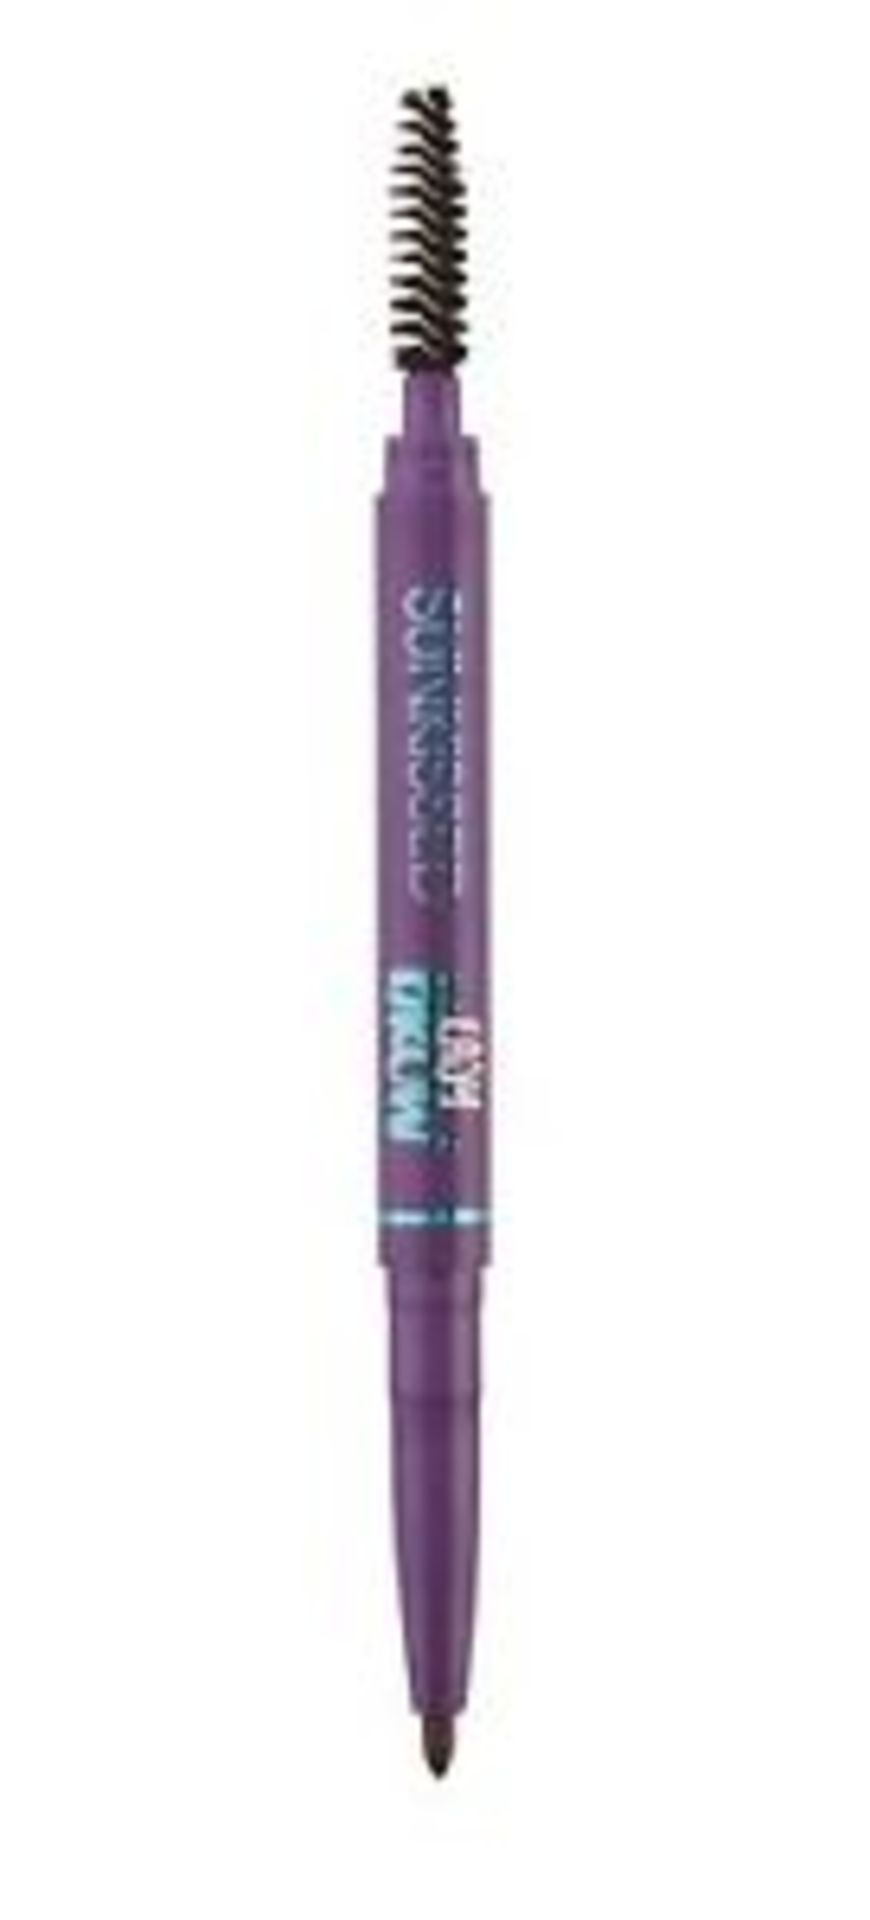 V Brand New Sunkissed Easy Brow 2in1 Pencil Med. Dark